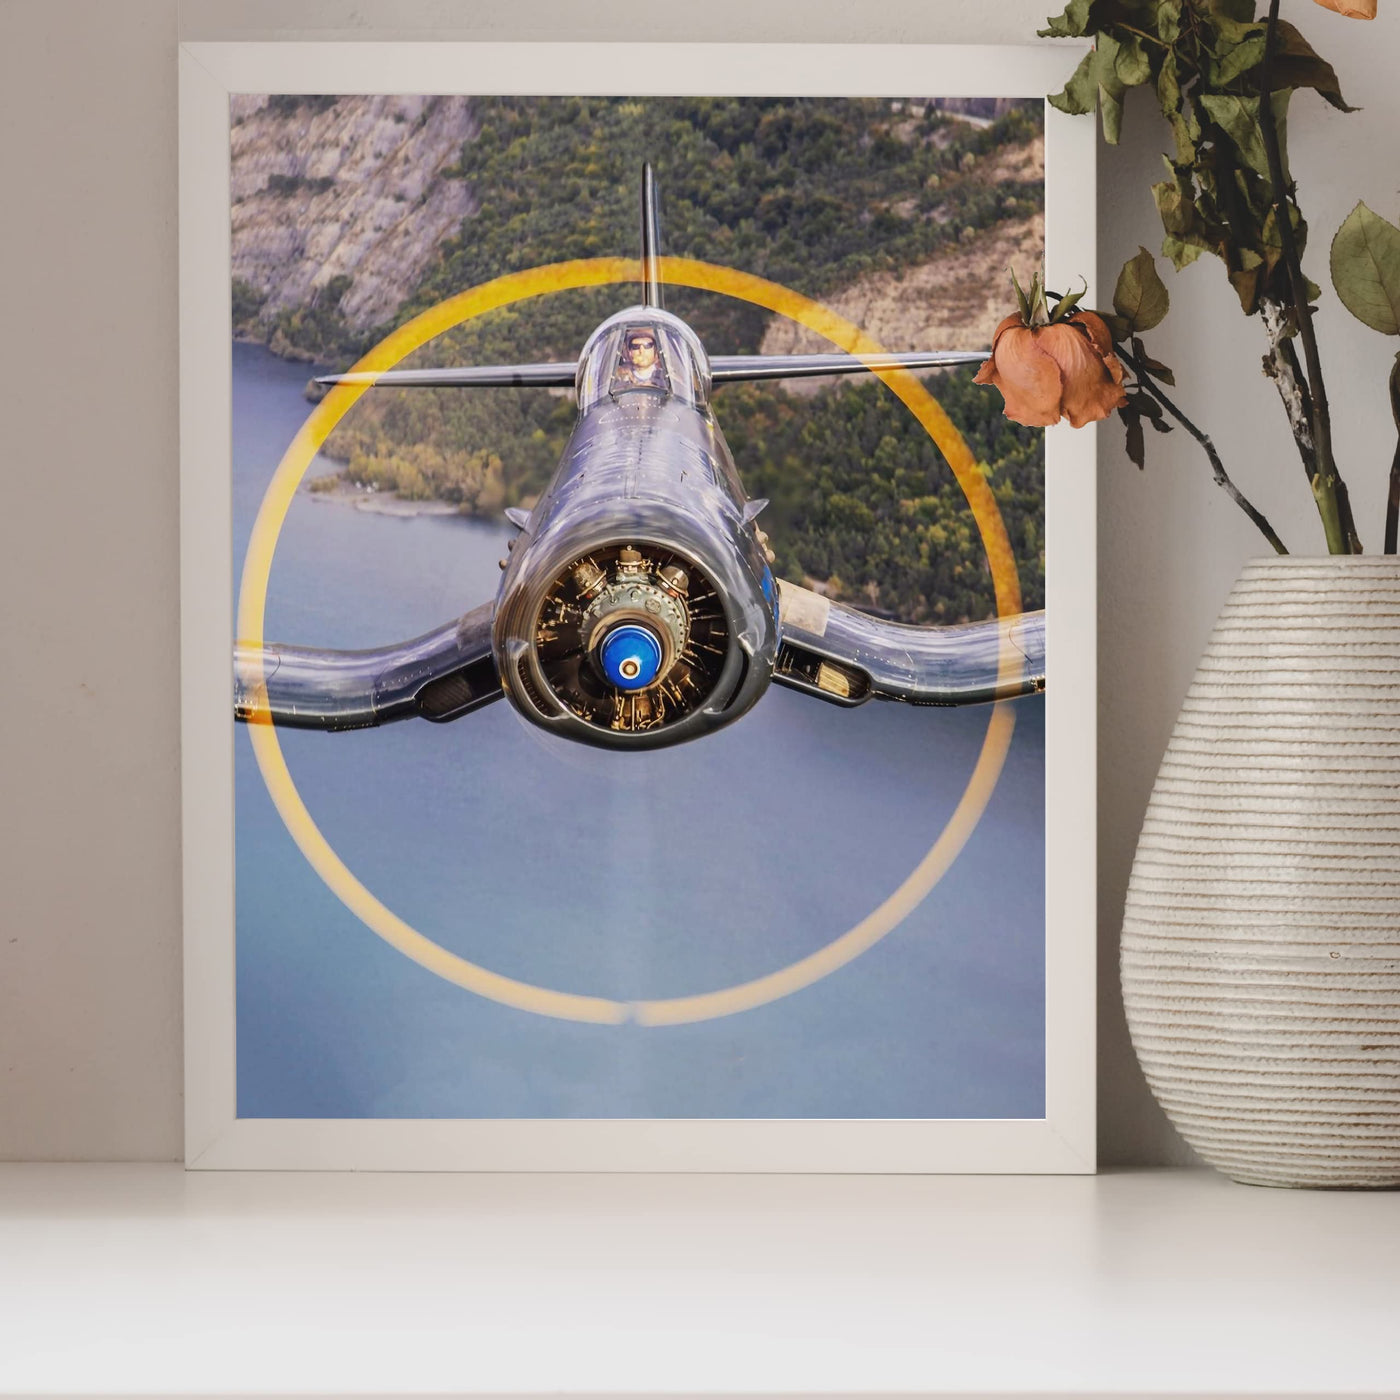 Vought F4U Corsair Fighter Jet -8 x 10" US Air Force - American Military Aircraft Wall Print -Ready to Frame. Home-Office-Garage-Shop-Man Cave Decor! Great Gift for Active Duty Military & Veterans!